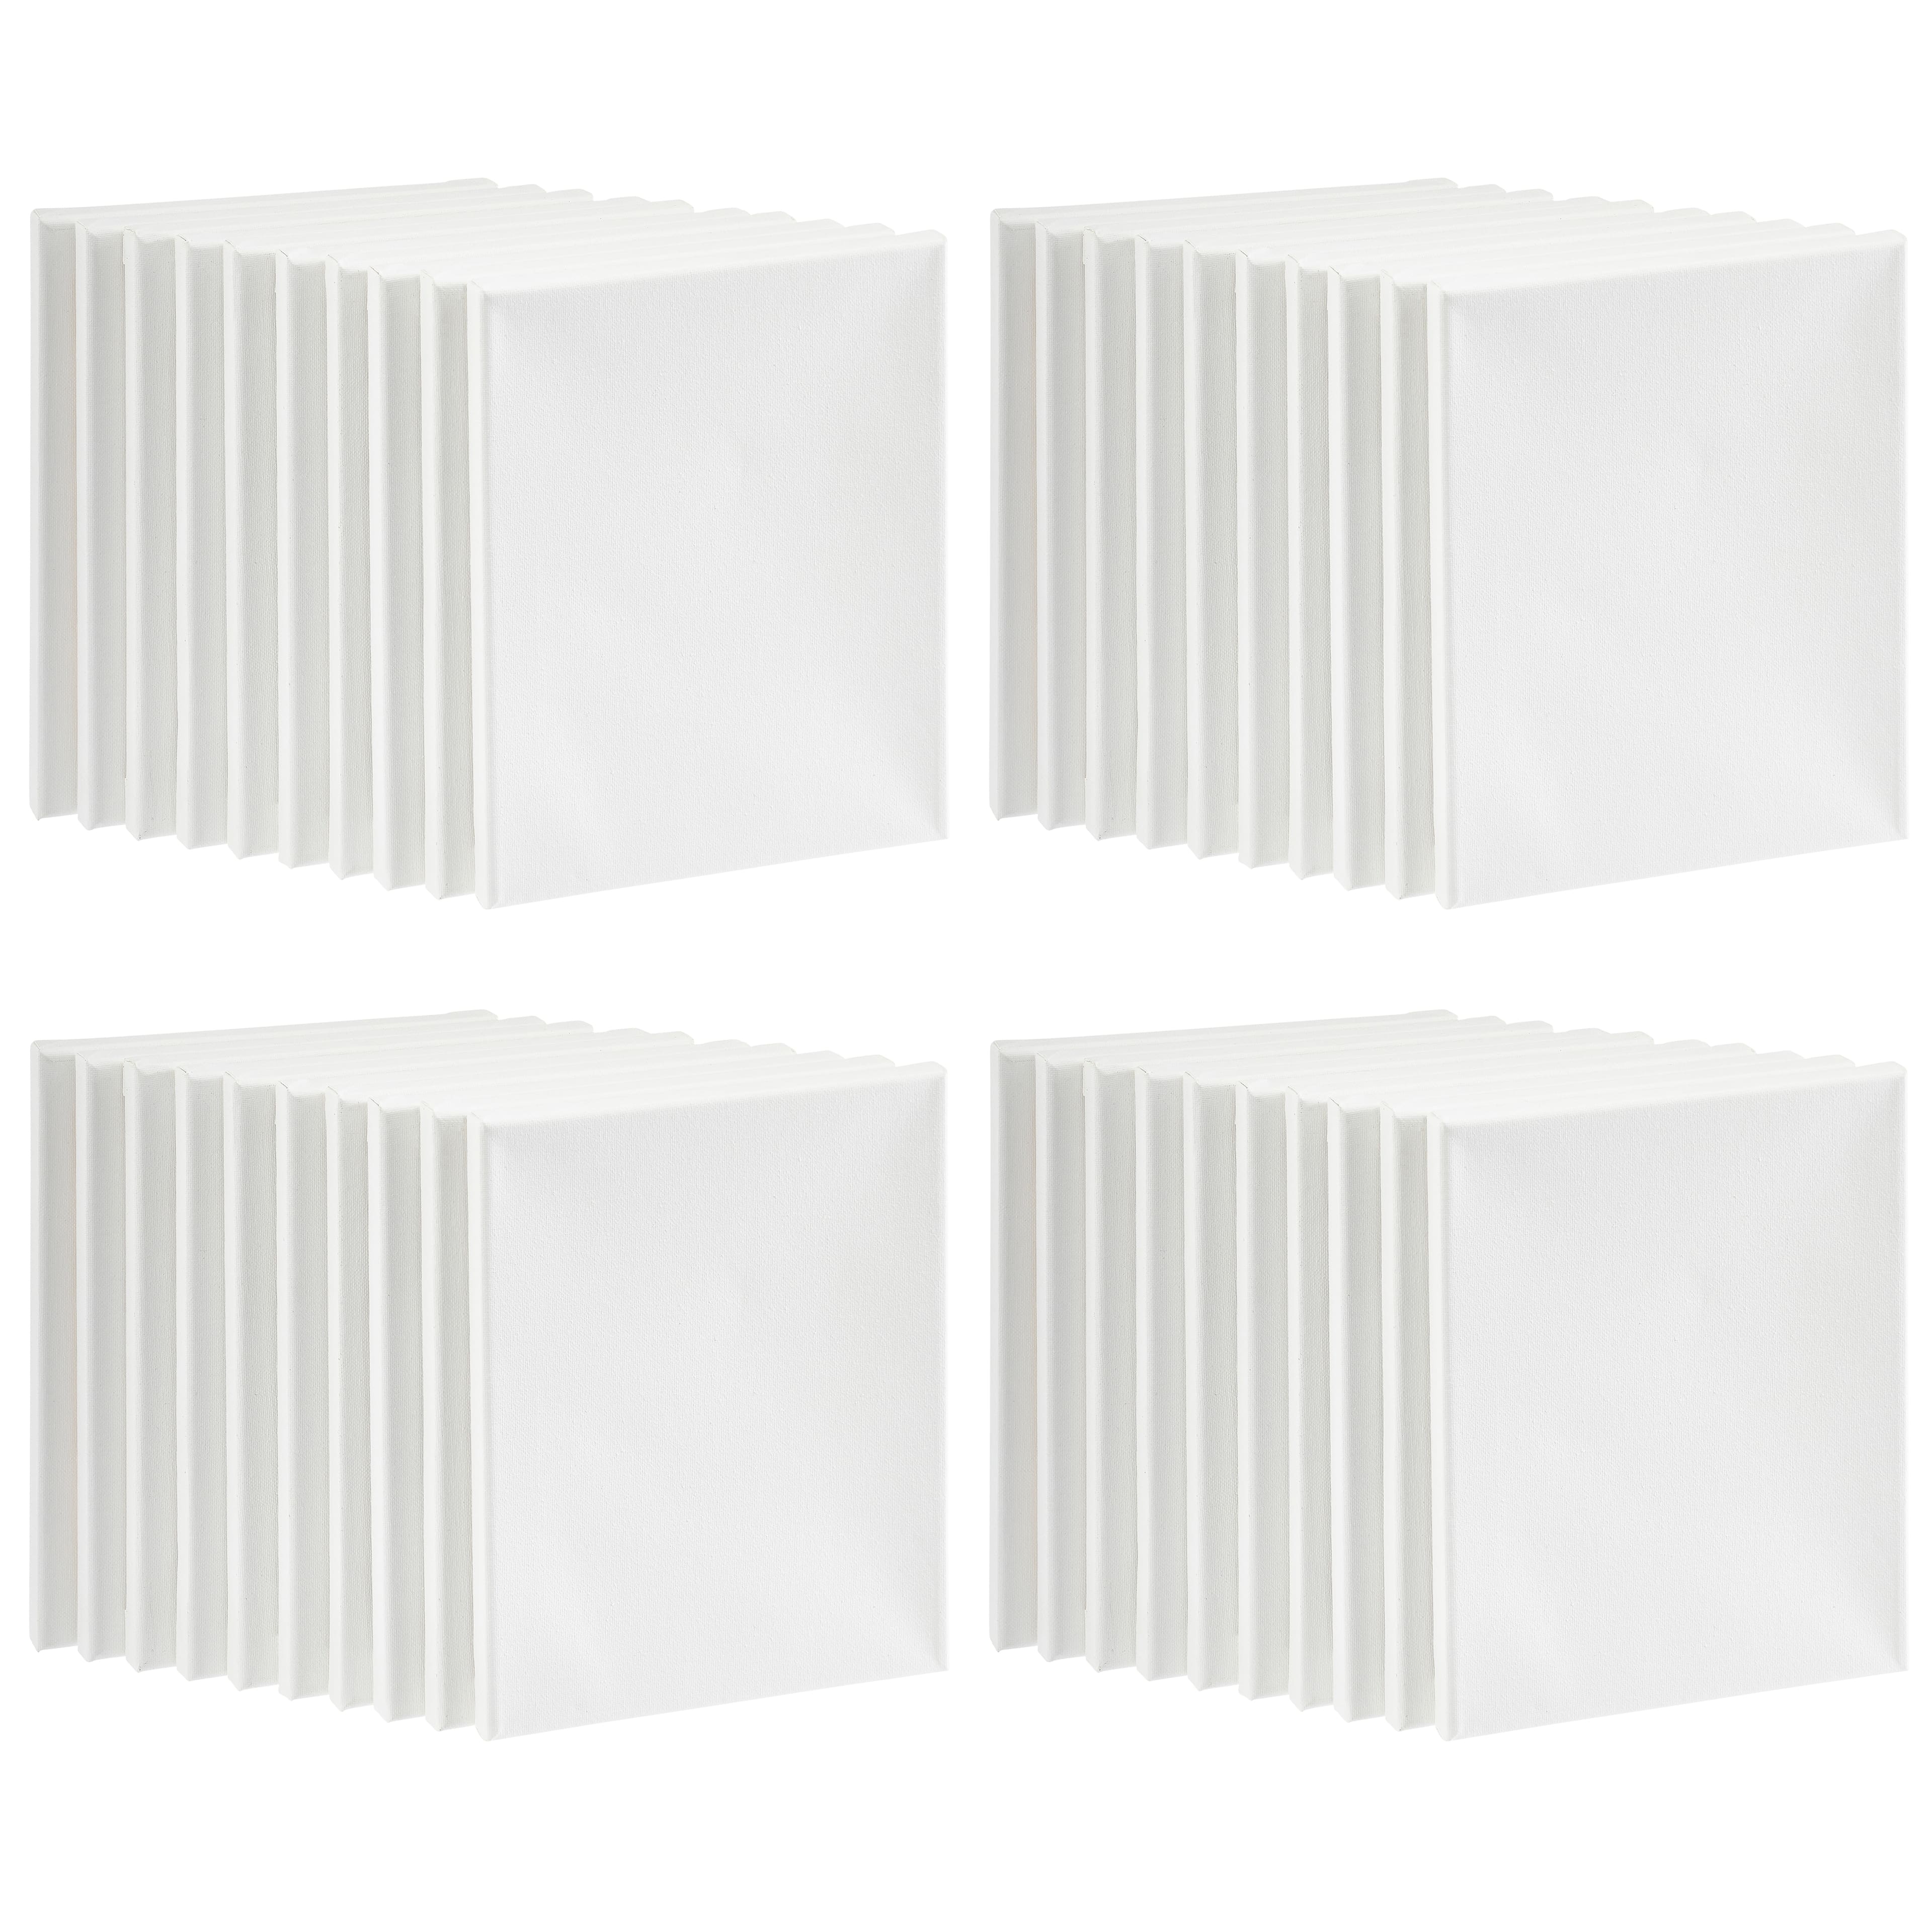 4 Packs: 6 ct. (24 total) 10 x 20 Super Value Canvas Pack by Artist's  Loft® Necessities™